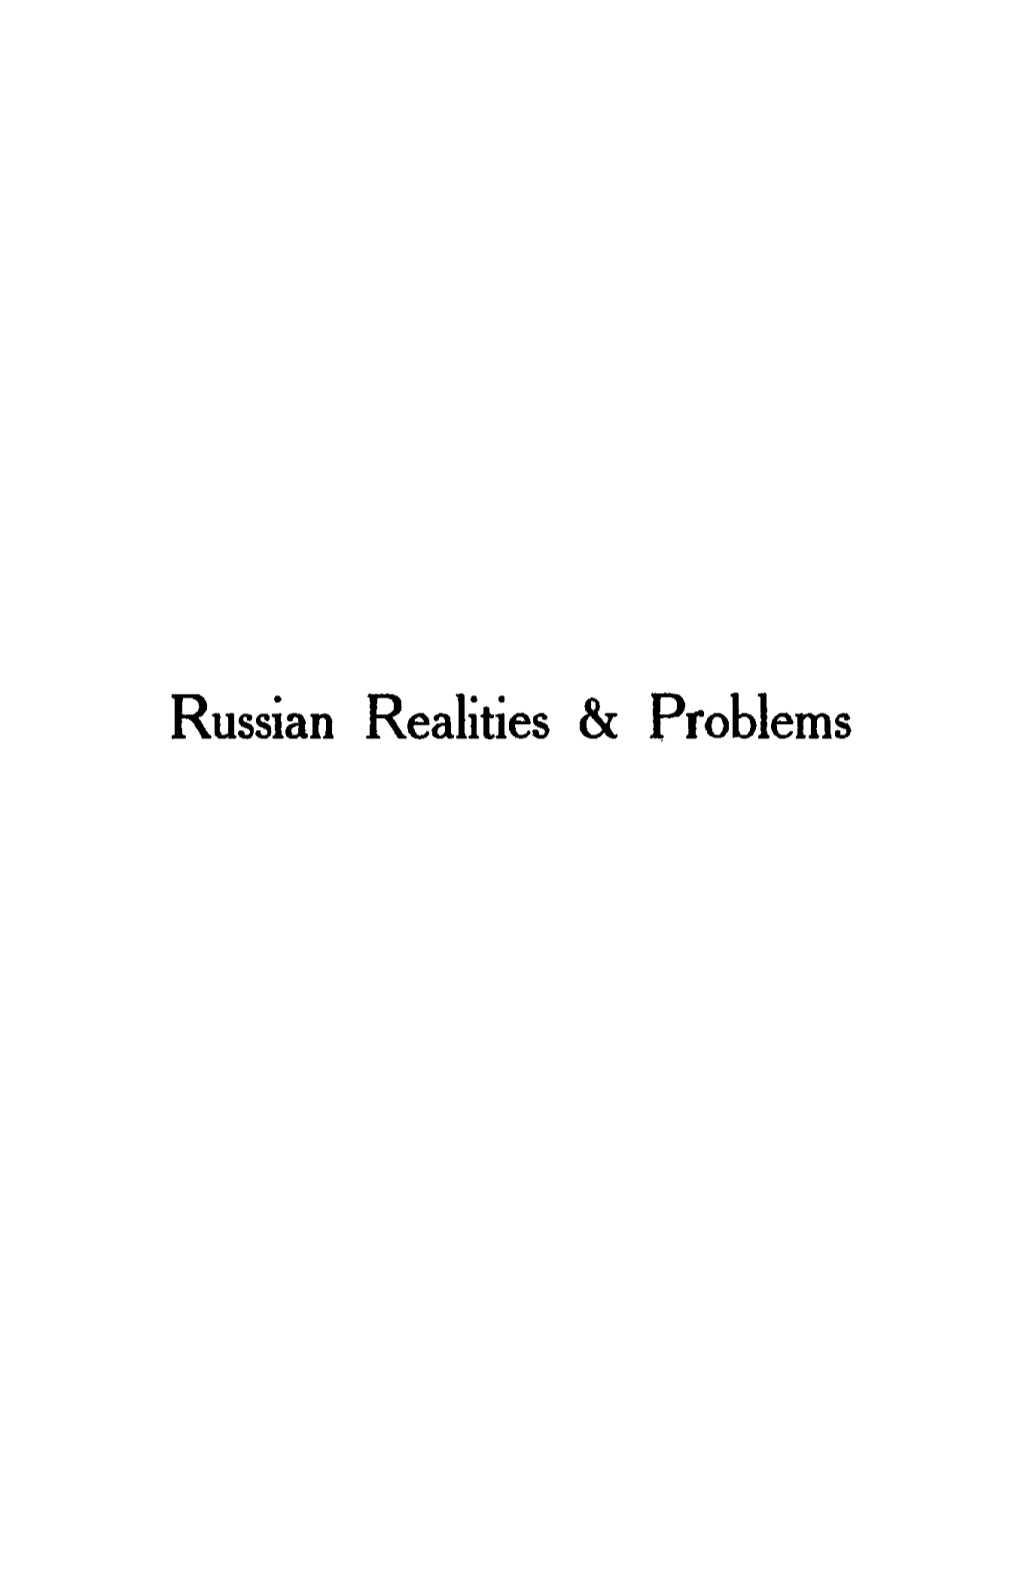 Russian Realities & Problems. Ed. by JD Duff. Cambridge